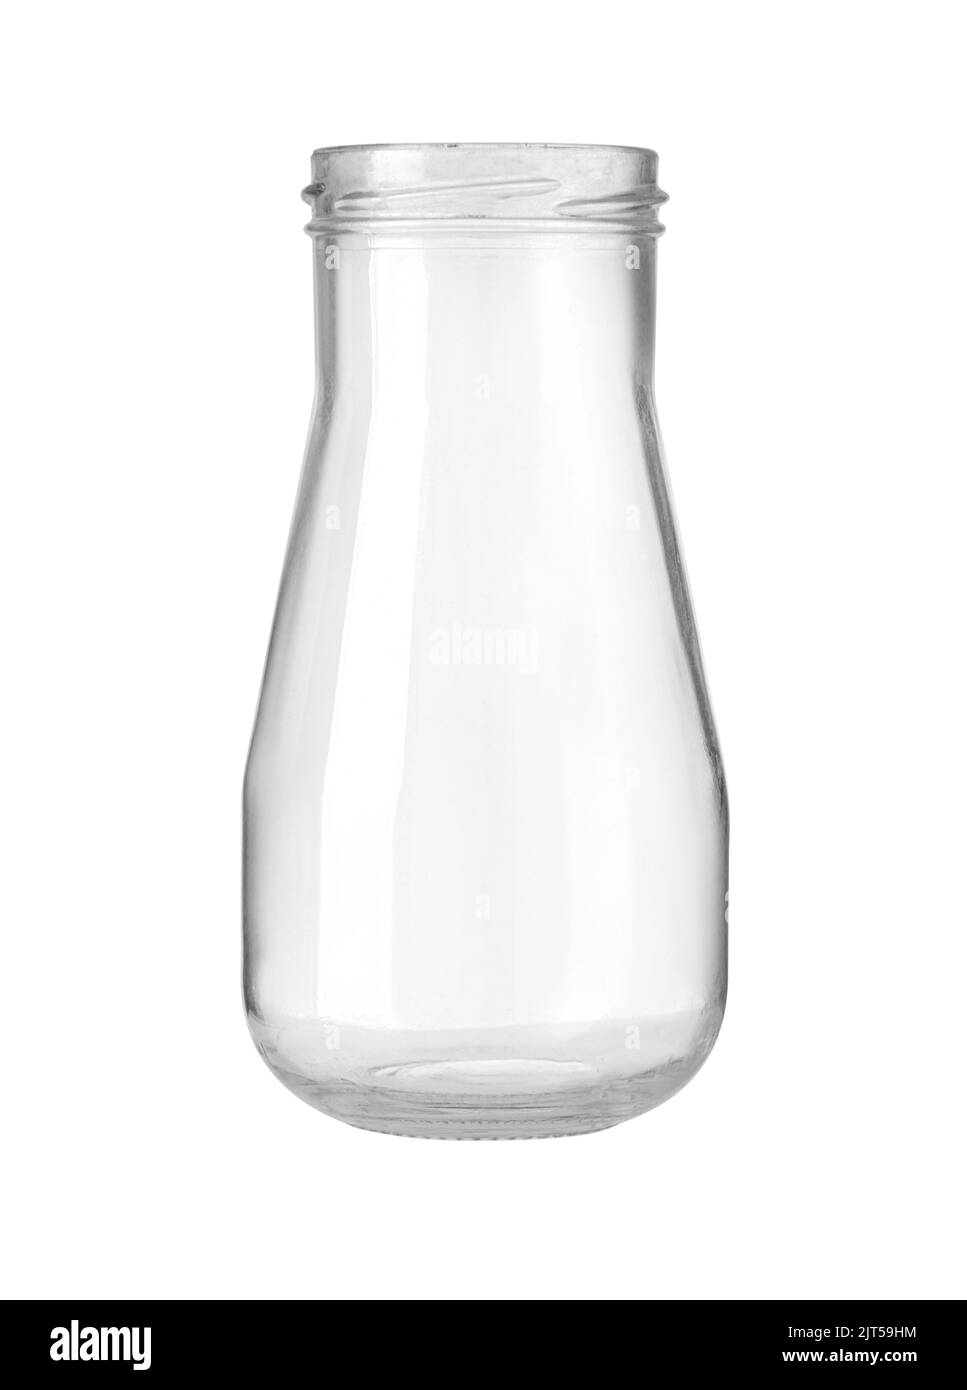 Empty jar glass isolated on white background with clipping path Stock Photo